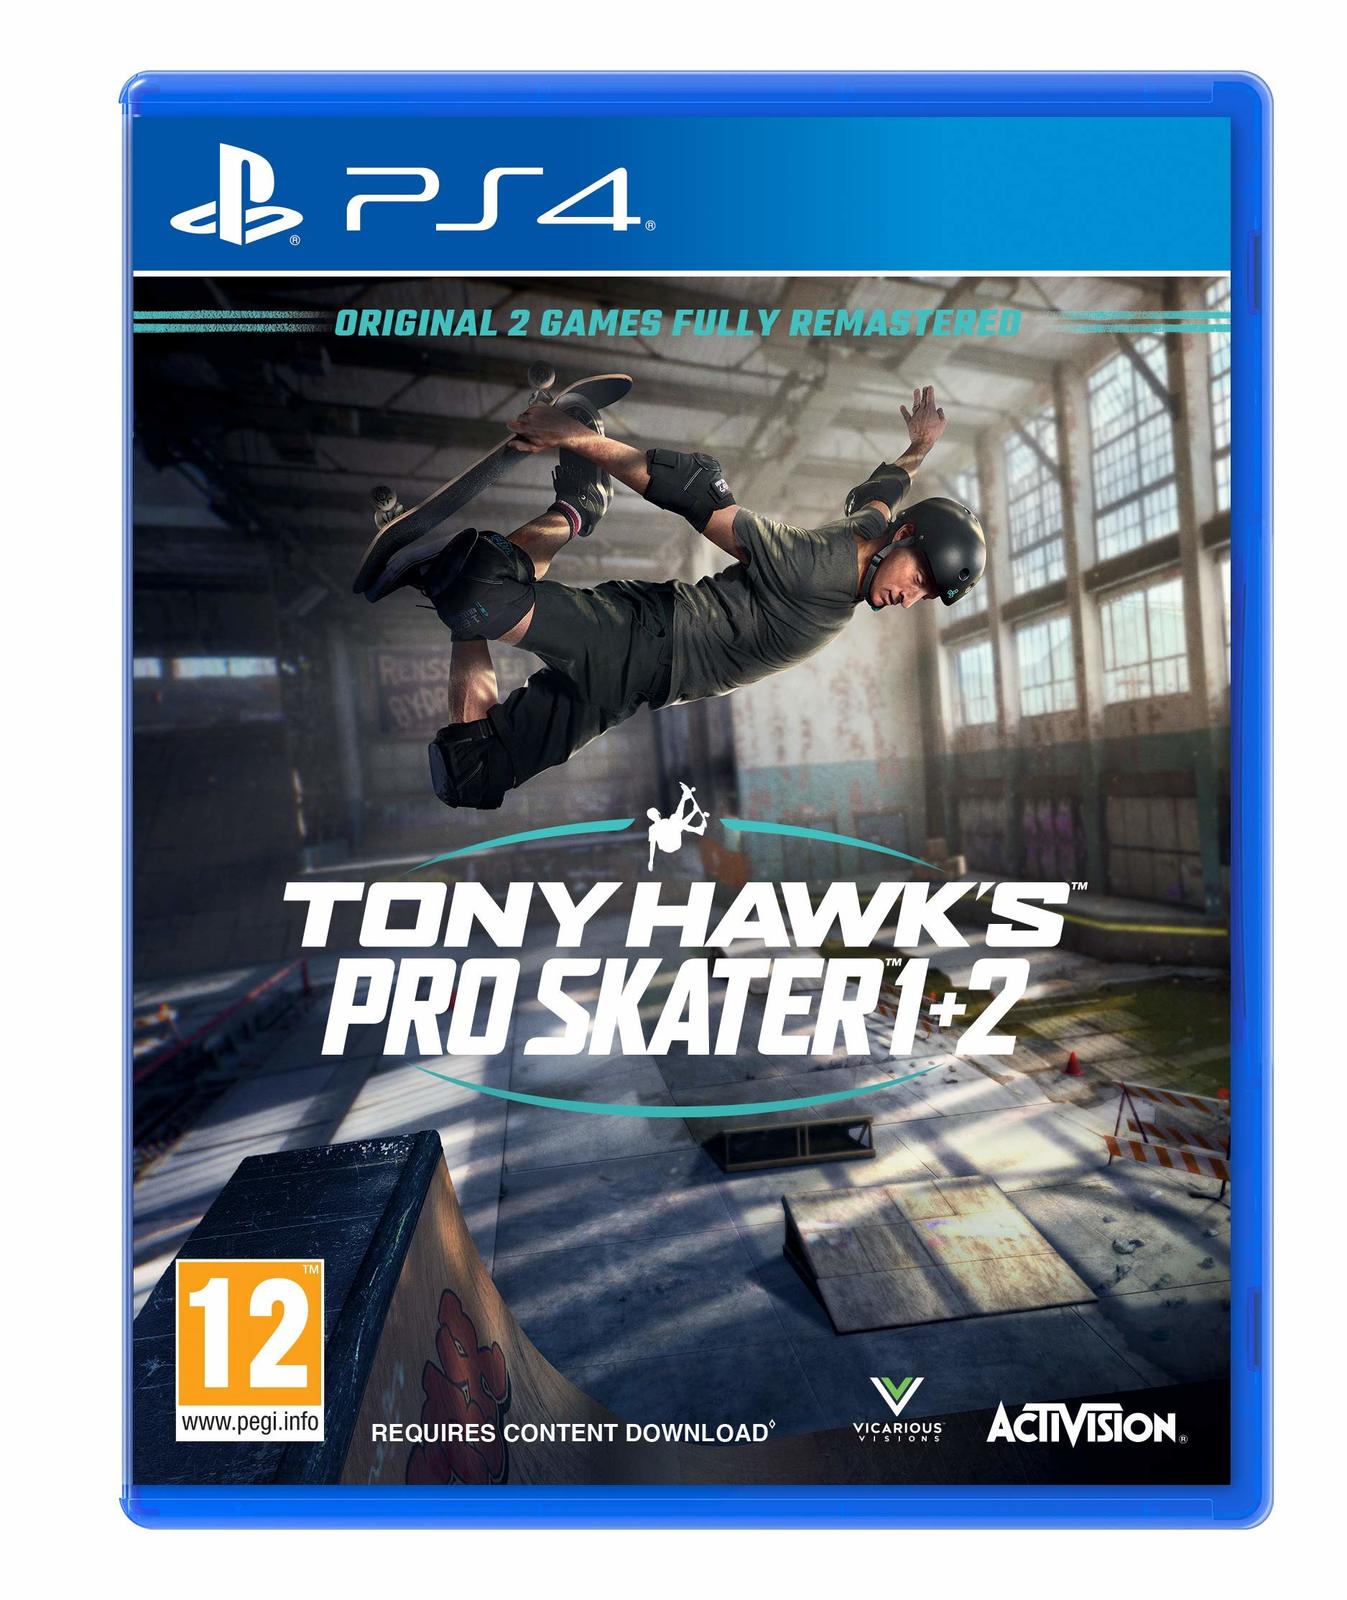 Primary image for Tony Hawk's Pro Skater 1 + 2 (PS4) [video game]